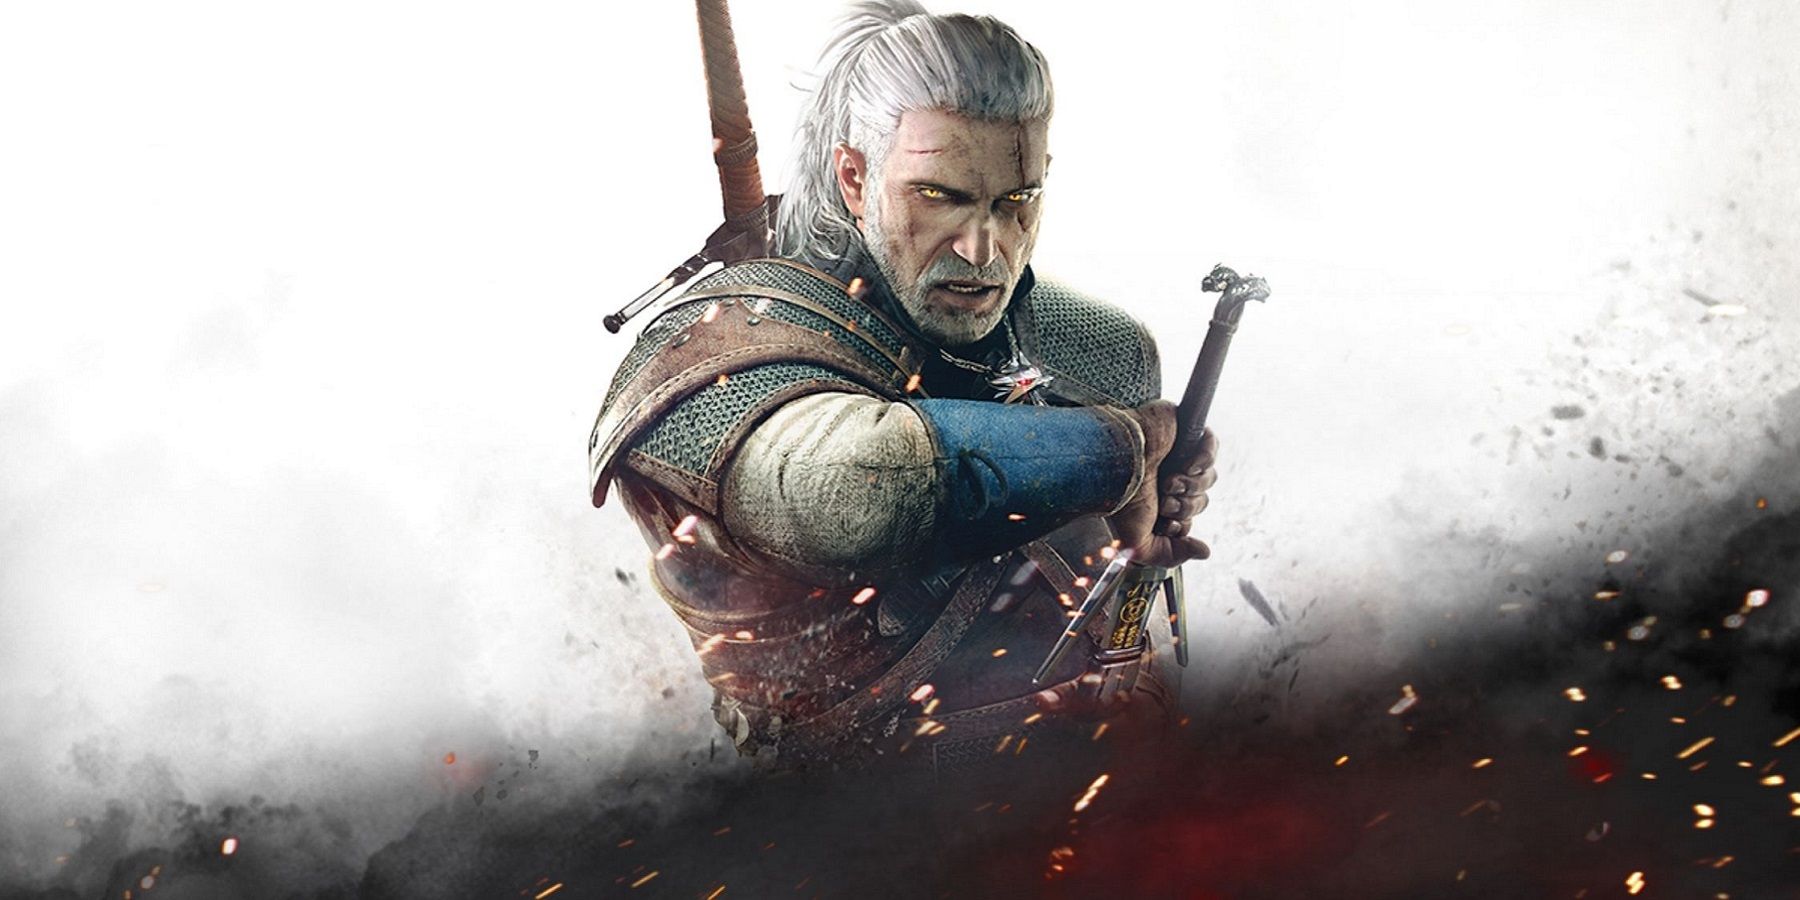 Image from The Witcher 3 showing Geralt about to unsheath his sword.